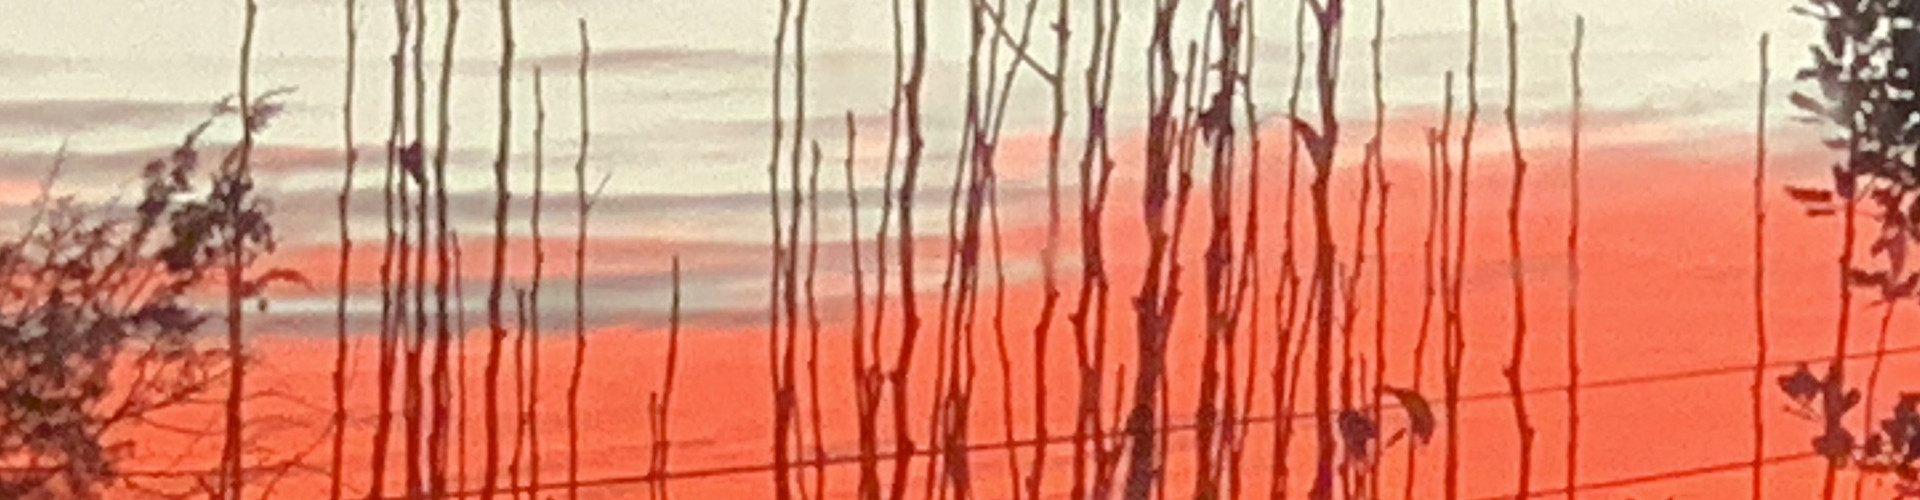 The picture shows a red sky at dawn below a layer of white clouds in the background with tree branches shooting straight up ready for winter crossed by power lines running horizontal in the front.